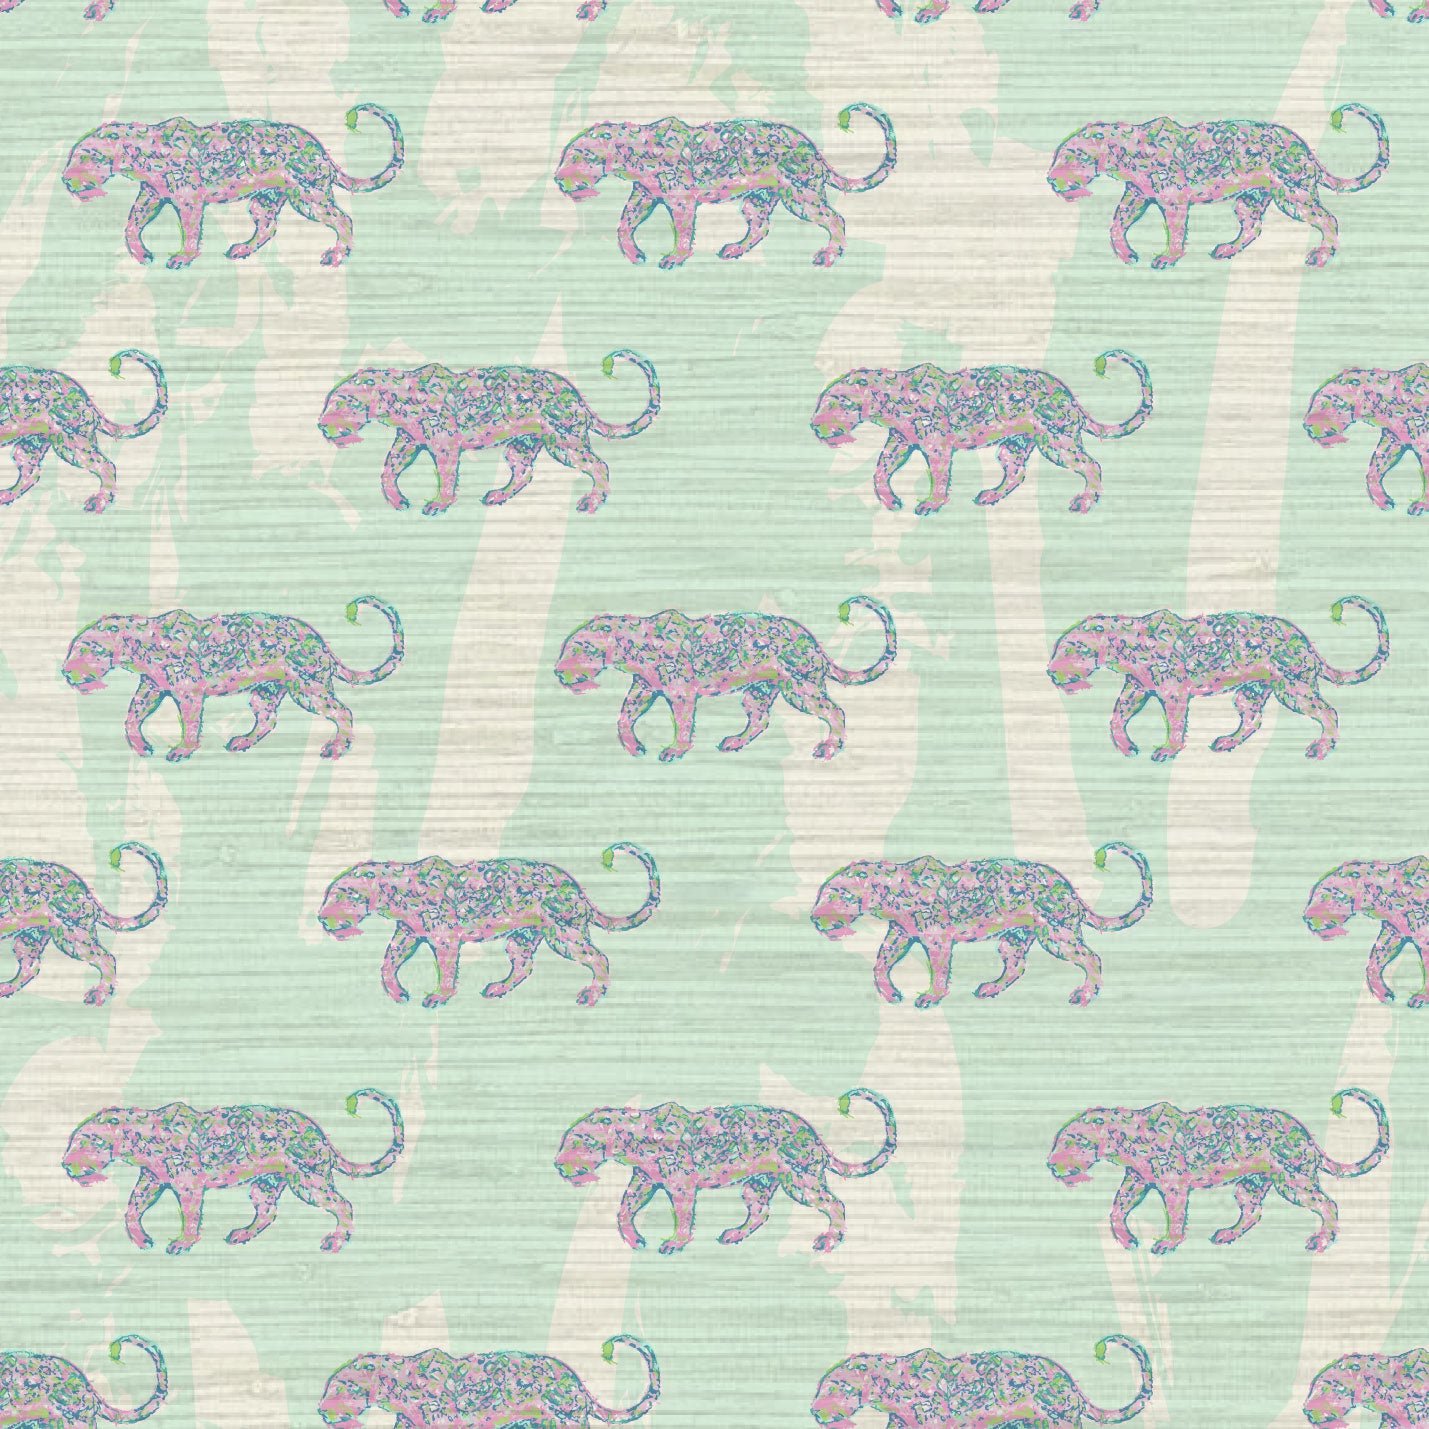 Grasscloth wallpaper Natural Textured Eco-Friendly Non-toxic High-quality Sustainable Interior Design Bold Custom Tailor-made Retro chic Grand millennial Maximalism Traditional Dopamine decor Tropical Jungle Coastal wild zoo animal cat cheetah grid stripe horizontal kids playroom bathroom mint green pastel pink